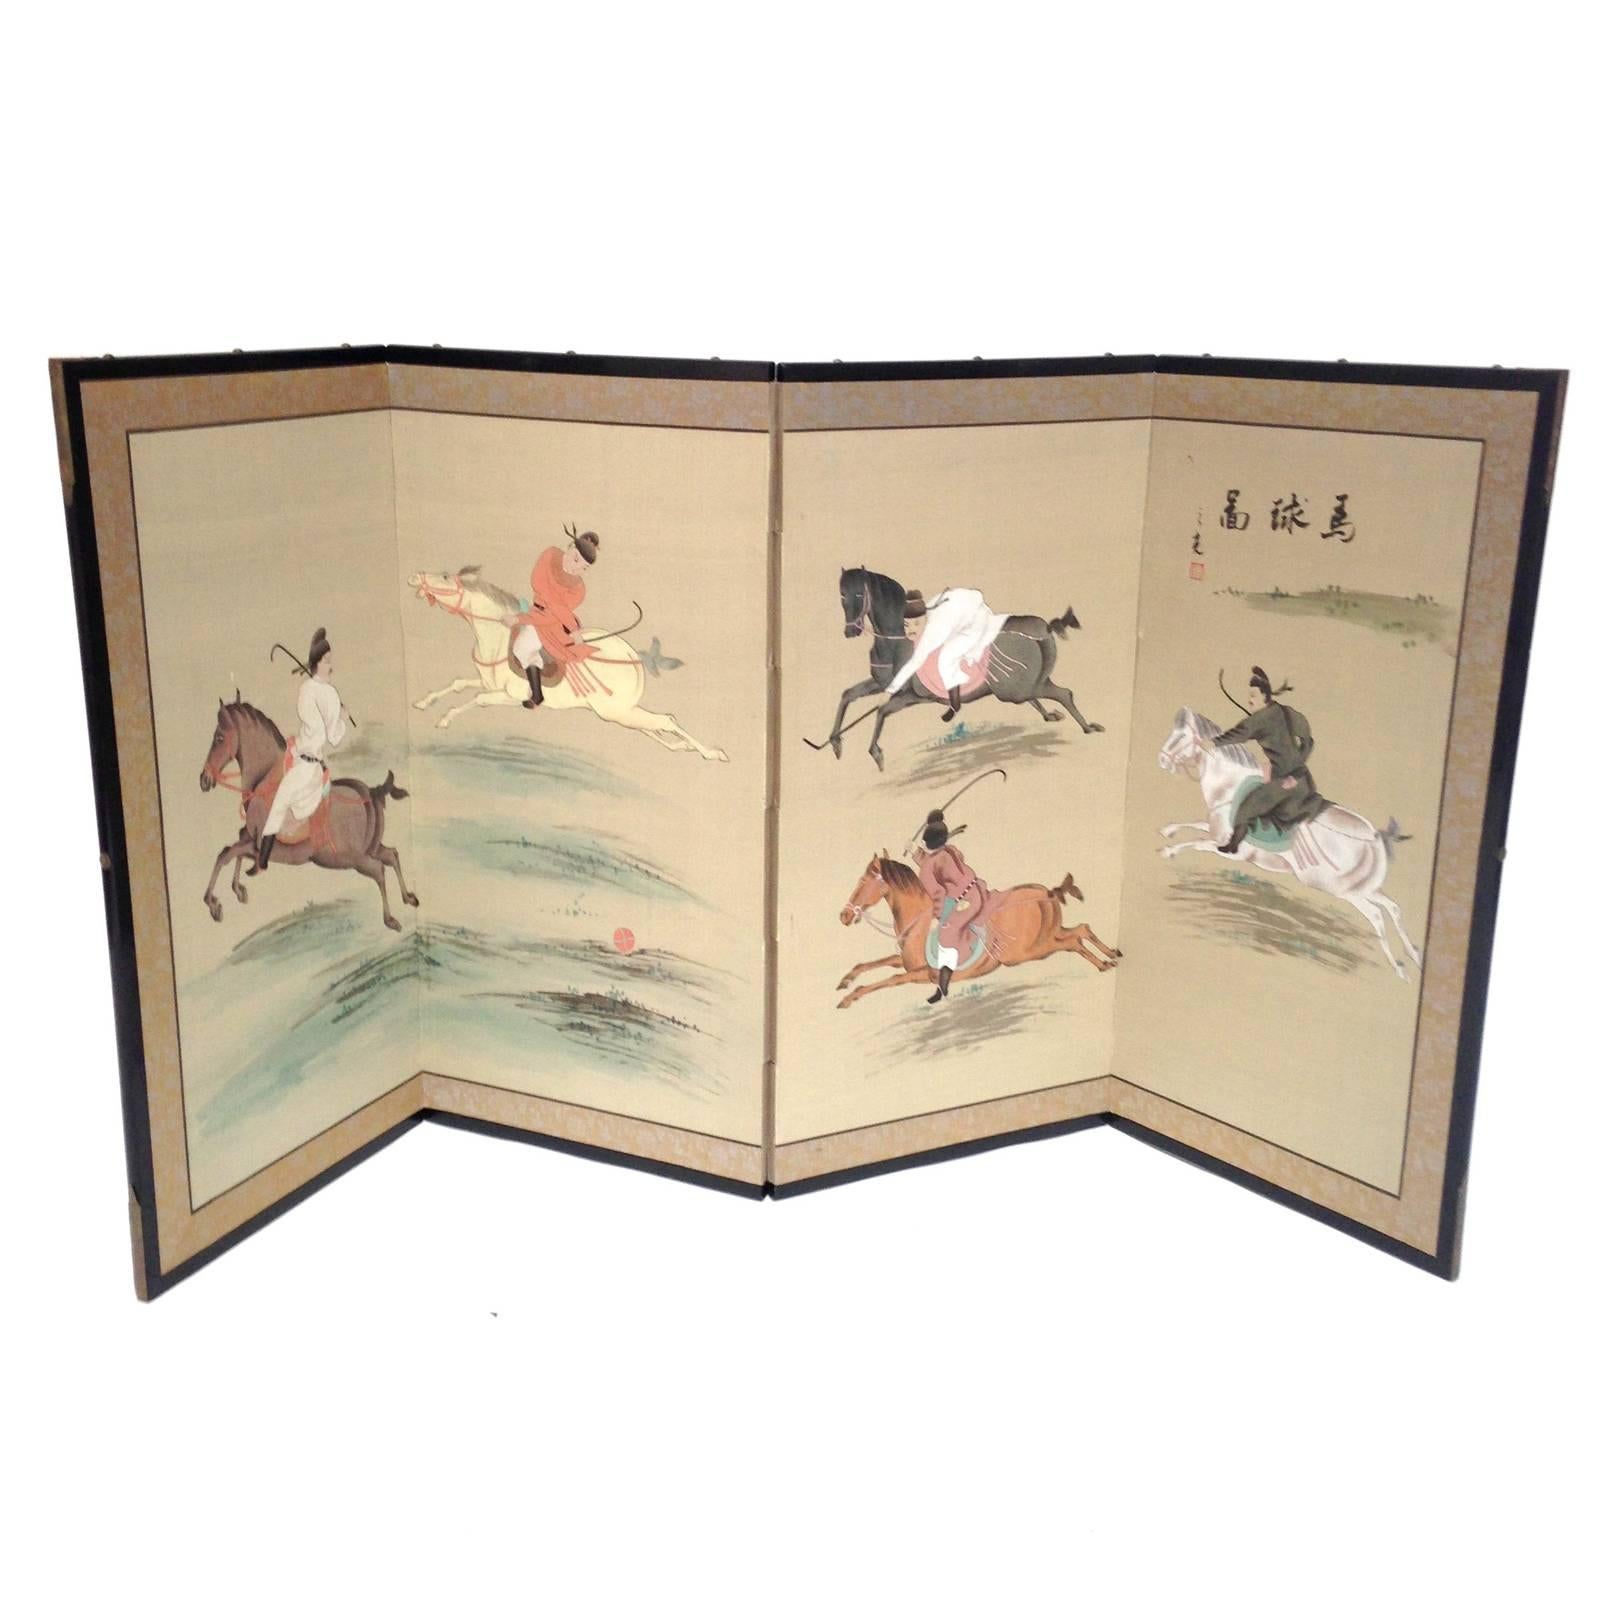 A rare, four panel folding Japanese equestrian byobu silk screen depicting five men on horseback playing a polo style game. A unique screen with painted panels and vibrant colors with an Hermes feel. It features an ebonized wood frame with brass